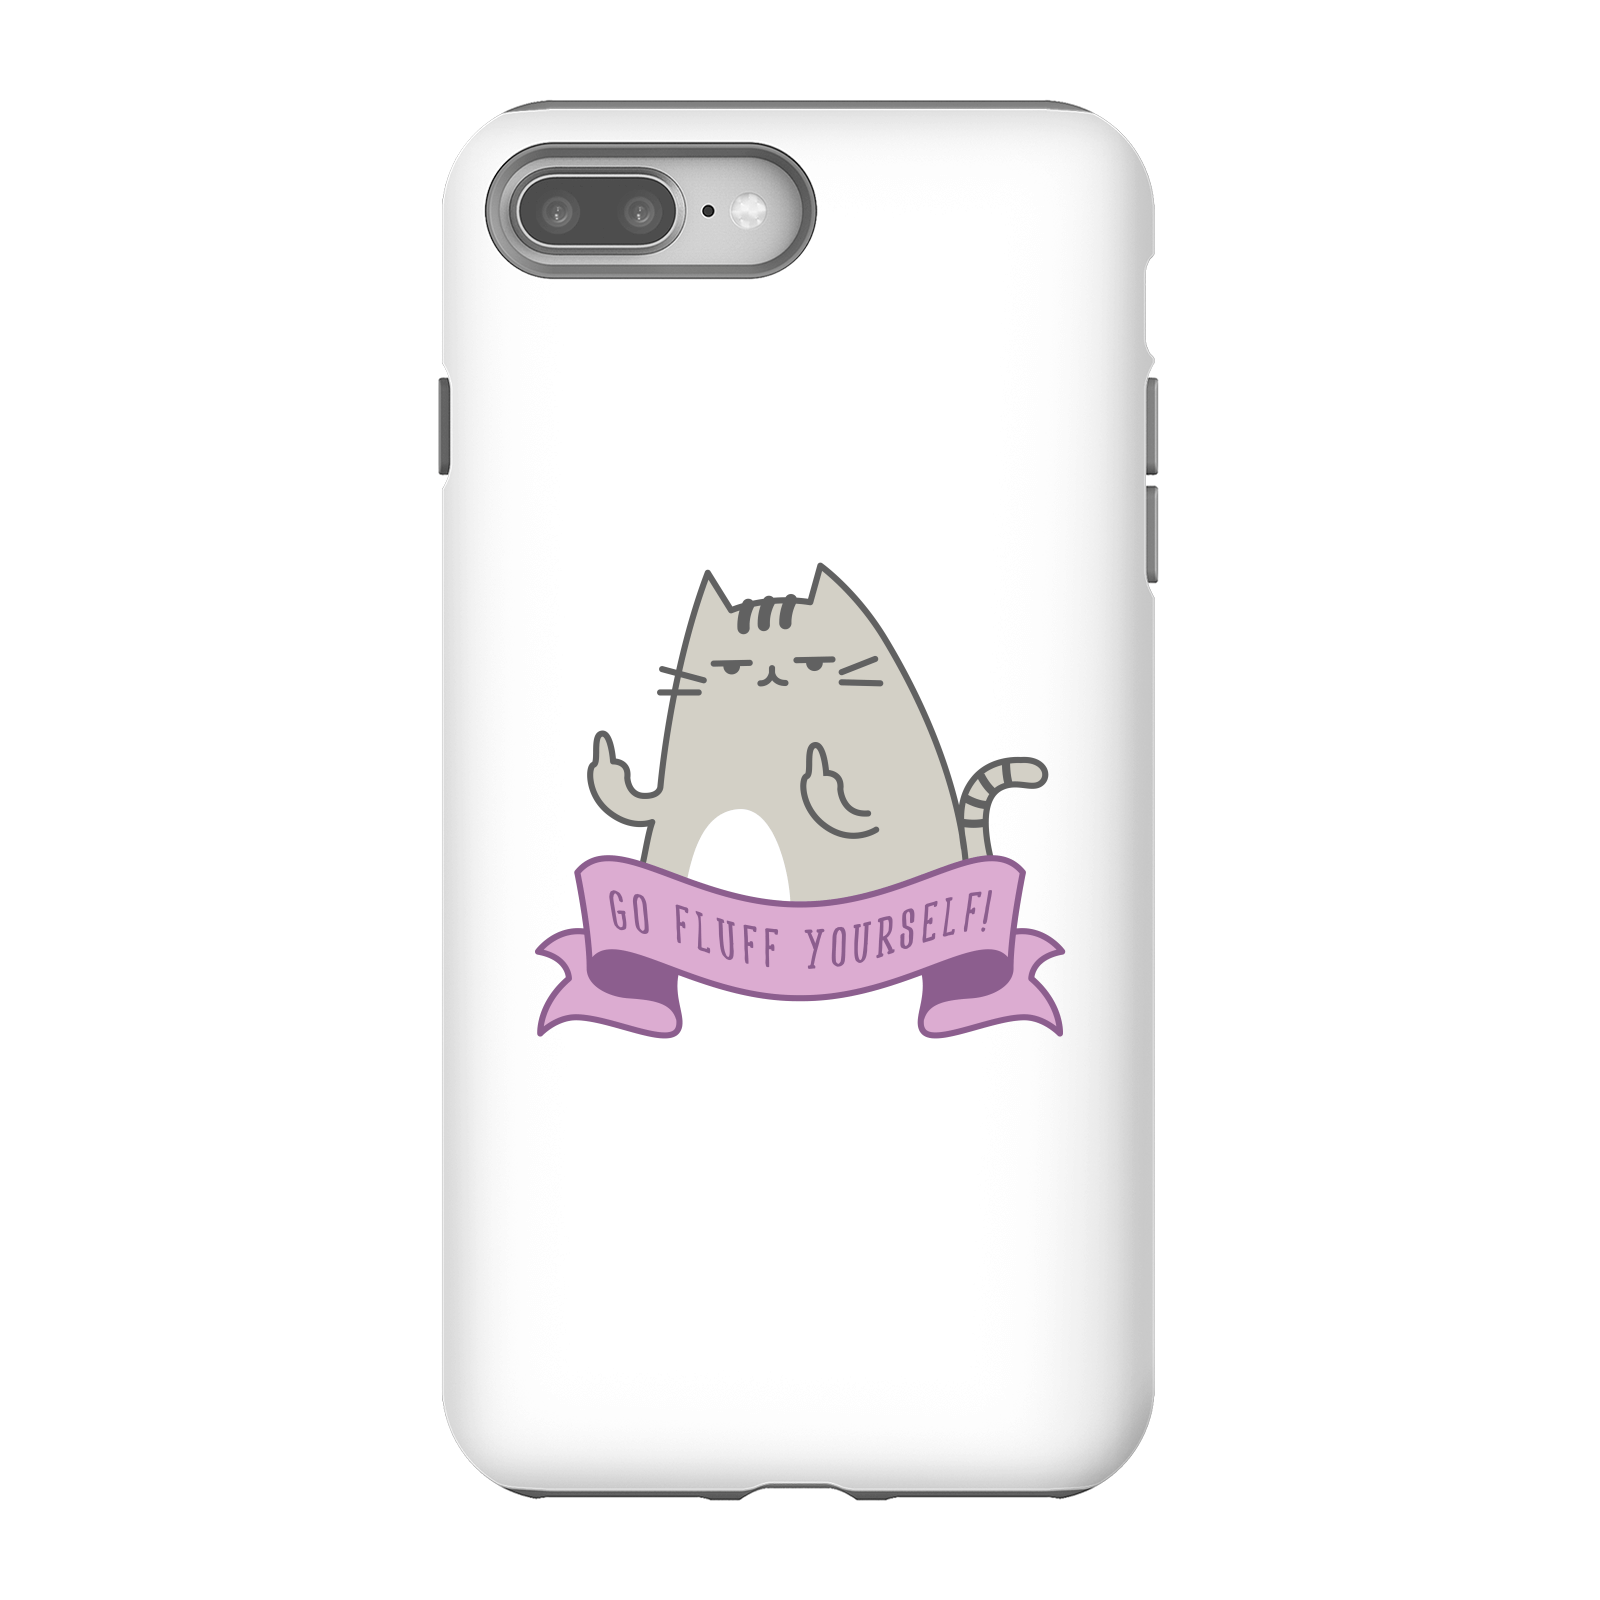 Go Fluff Yourself! Phone Case for iPhone and Android - iPhone 8 Plus - Tough Case - Matte